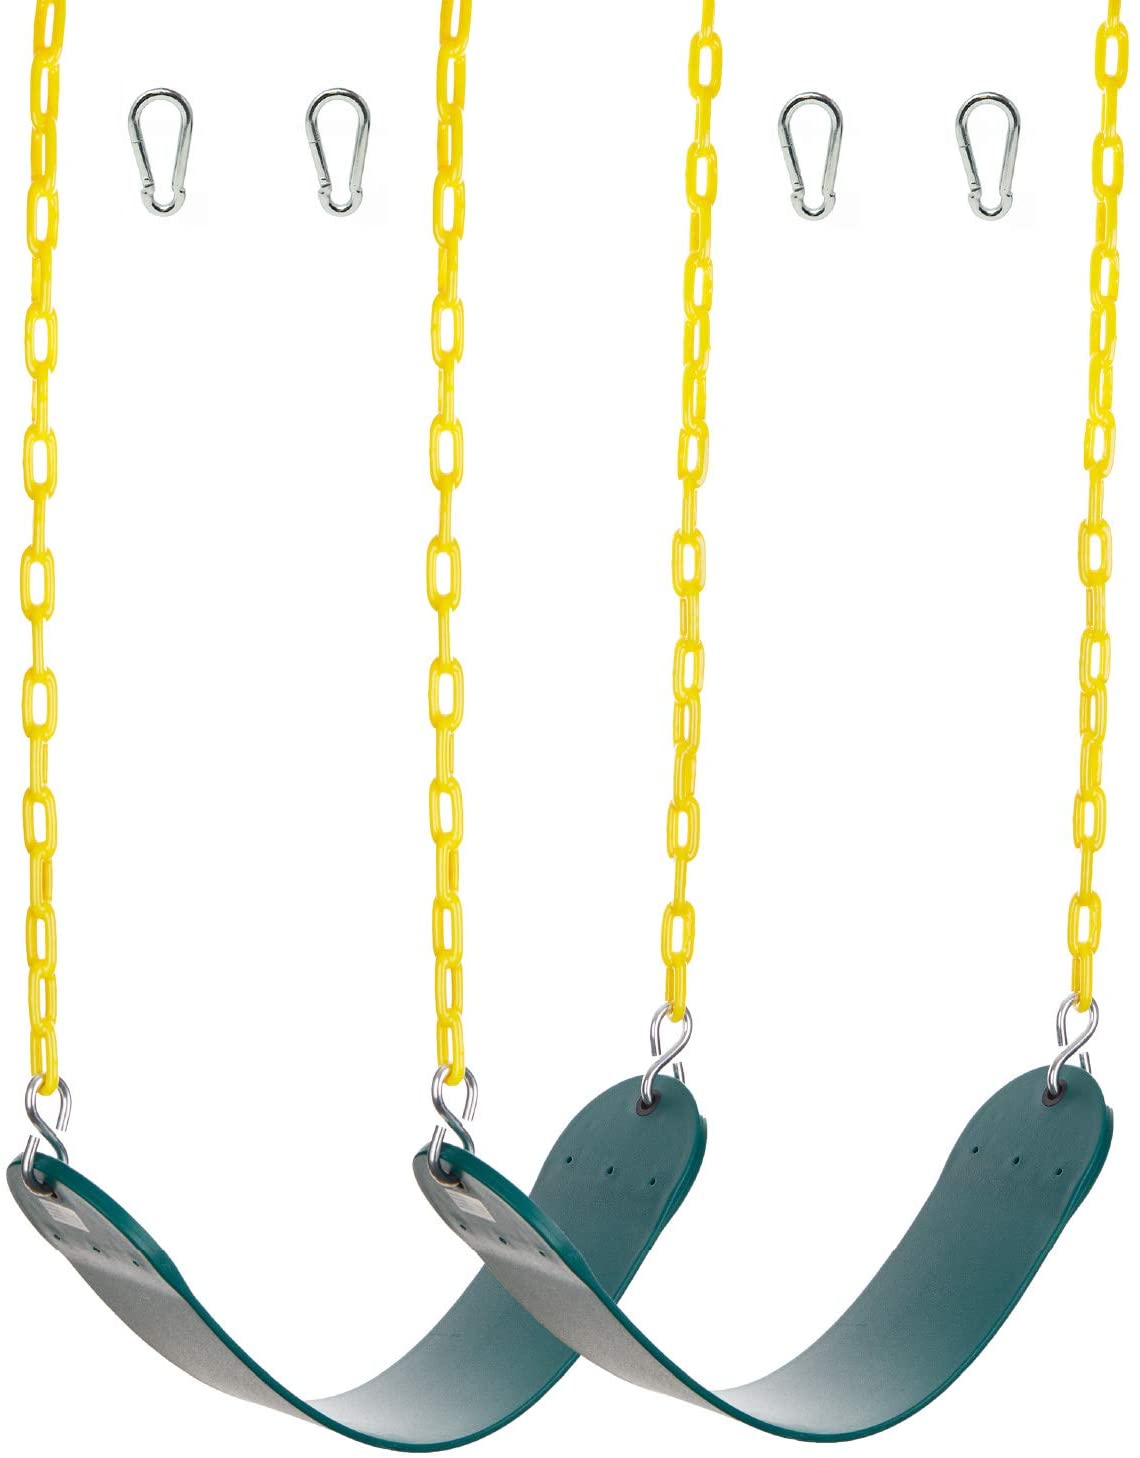 Squirrel Products 2 Pack Heavy Duty Strap Swing Seat - Swing Set Strap Swing Seat Replacement with Plastic Coated Chain for Easy Install - Green - (For 6 piece(s))